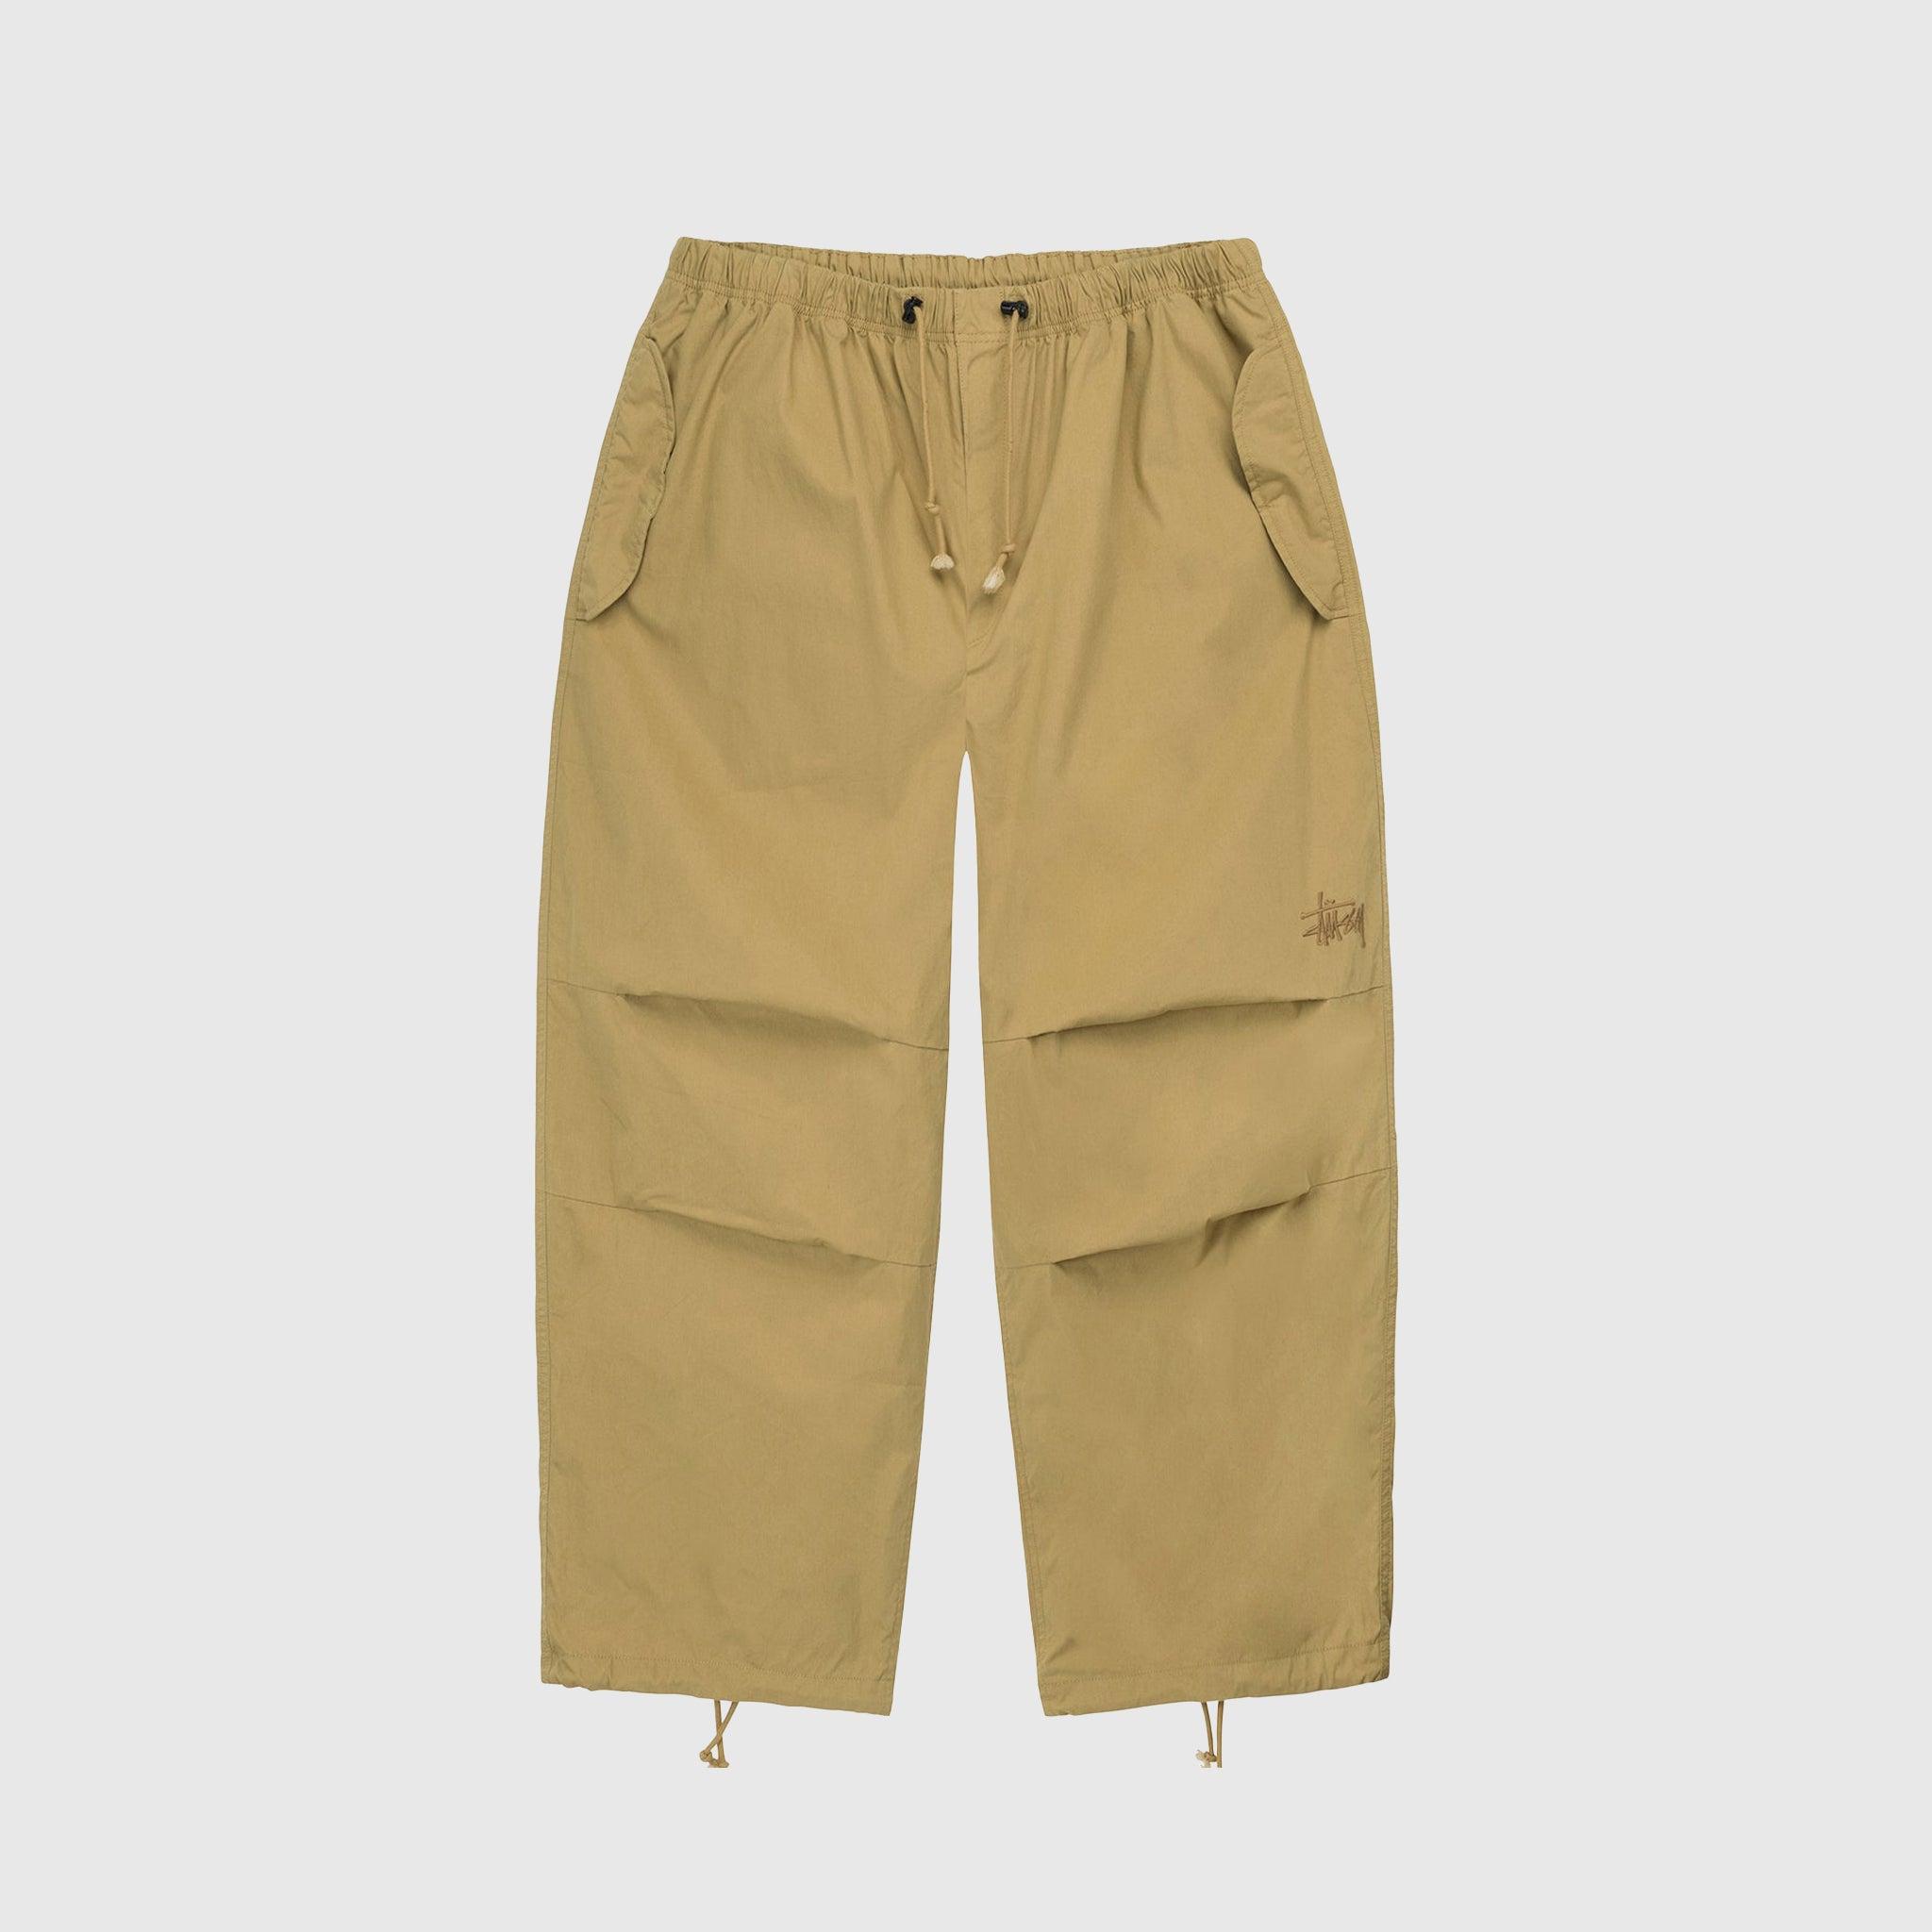 54%OFF!】 希少stussy NYCO OVER TROUSERS rahathomedesign.com